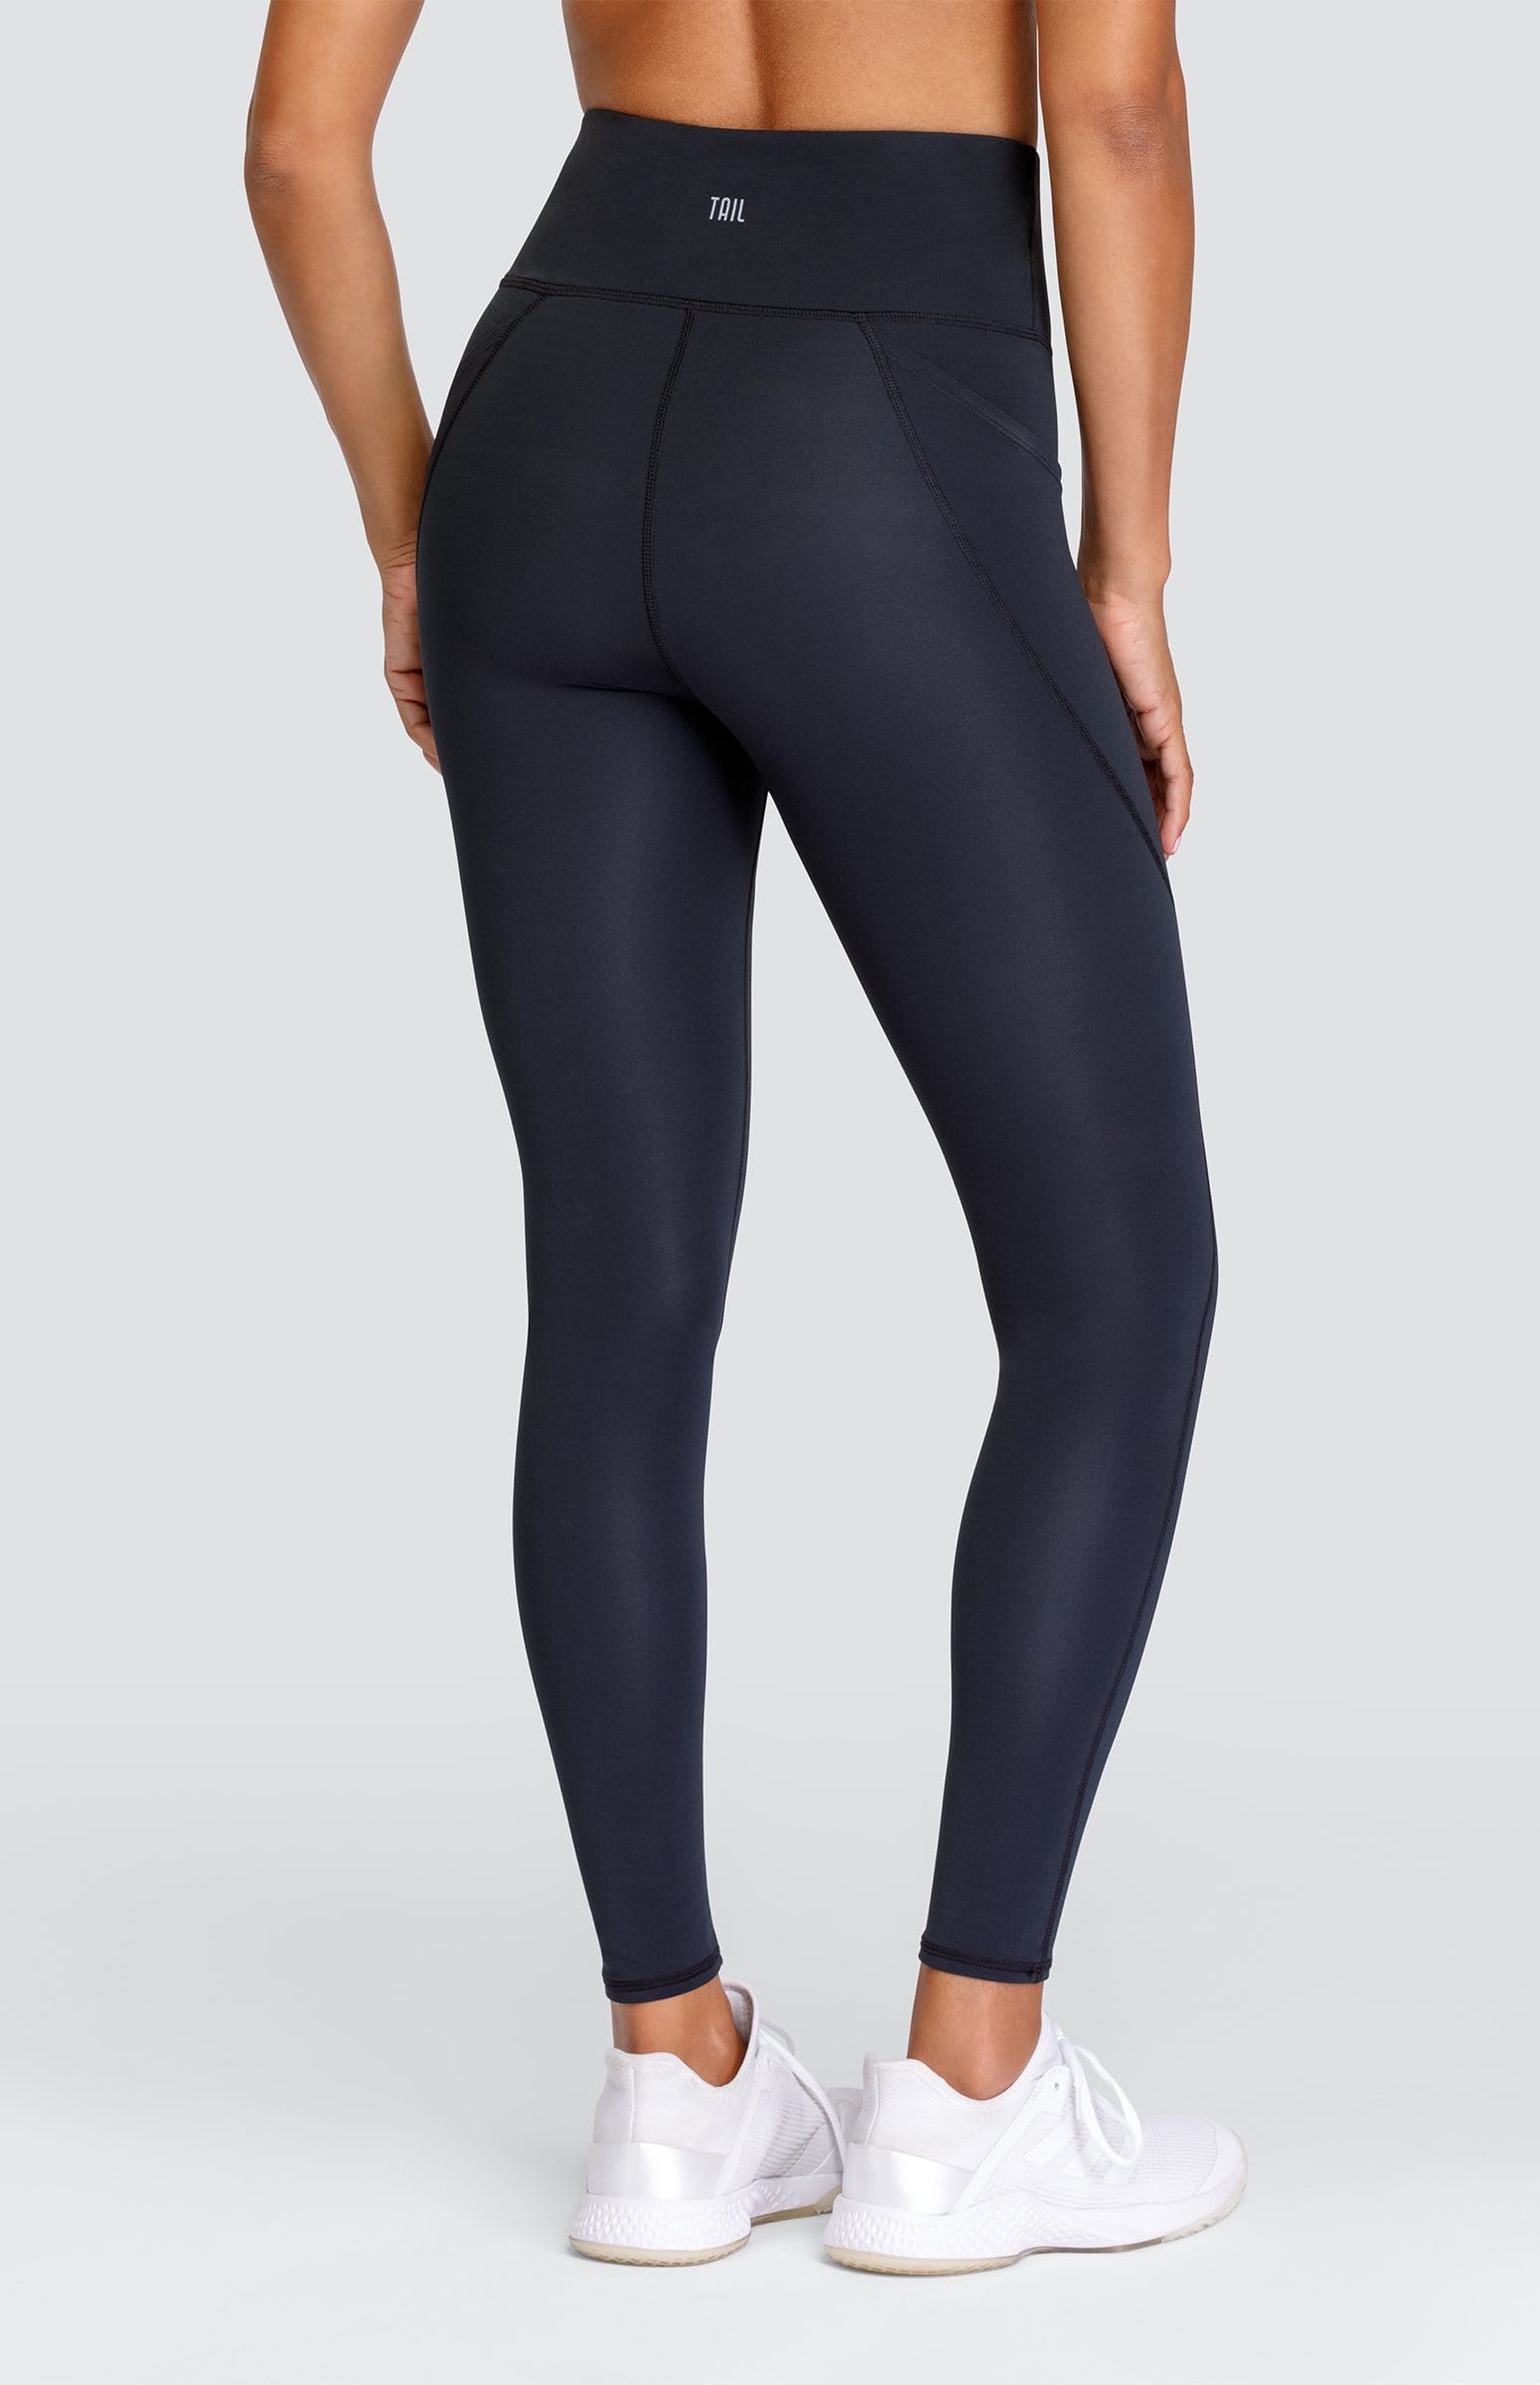 Why do leggings slide down? How do you prevent this from happening? - Quora